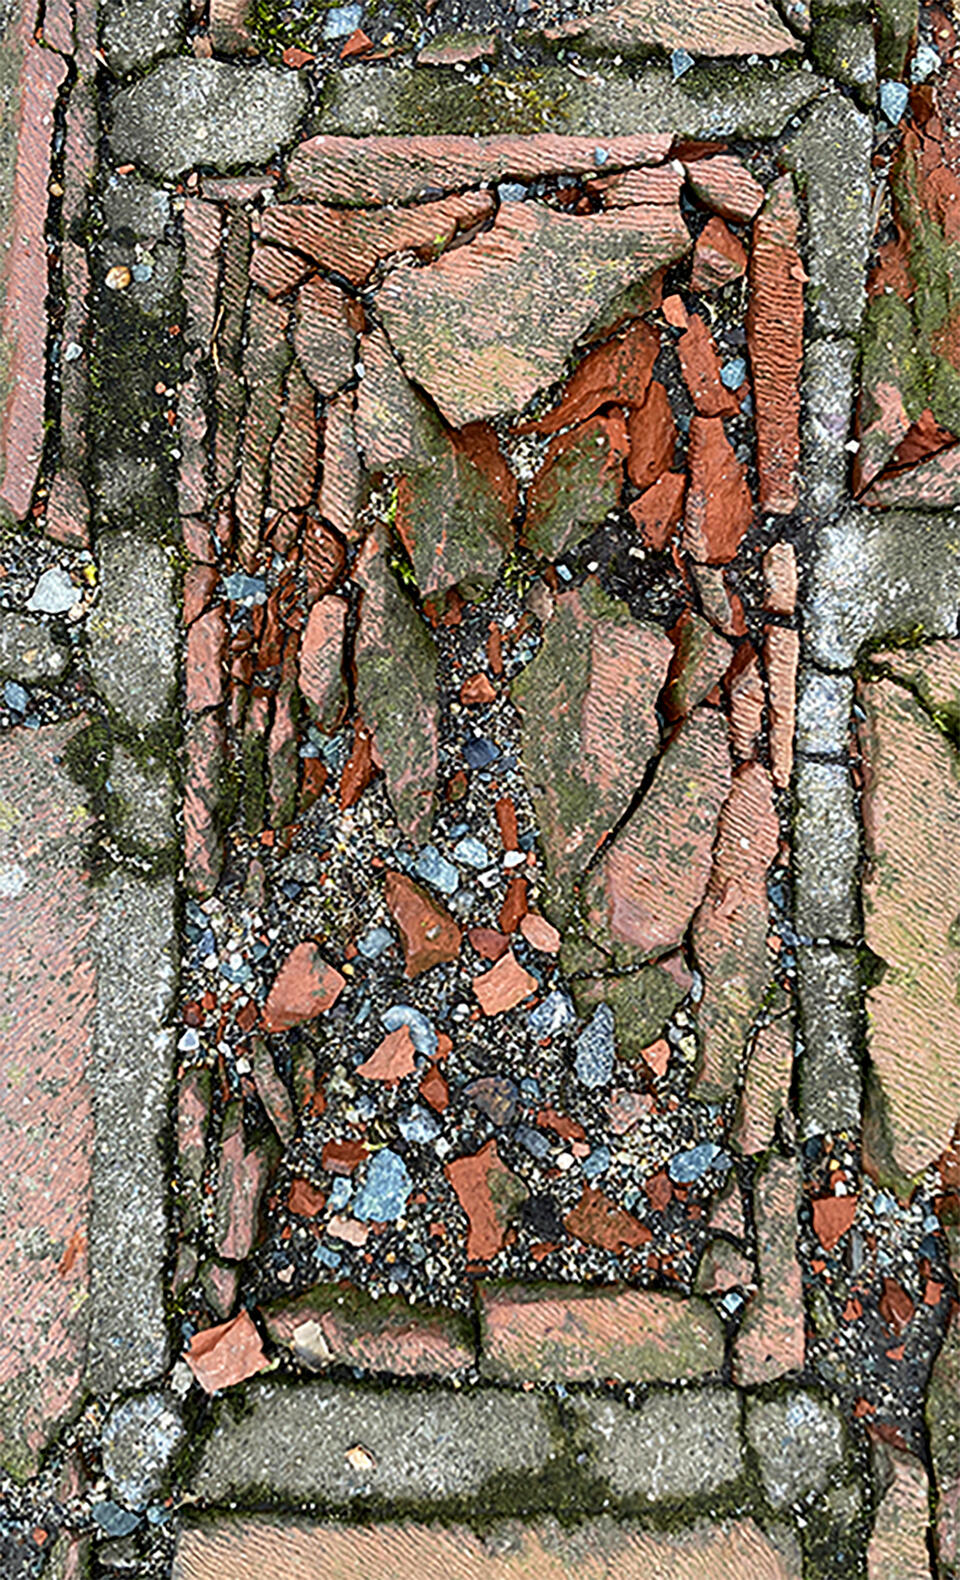 Photograph of a brick in bird's-eye view. Because of adjacent roots, the brick is breaking apart